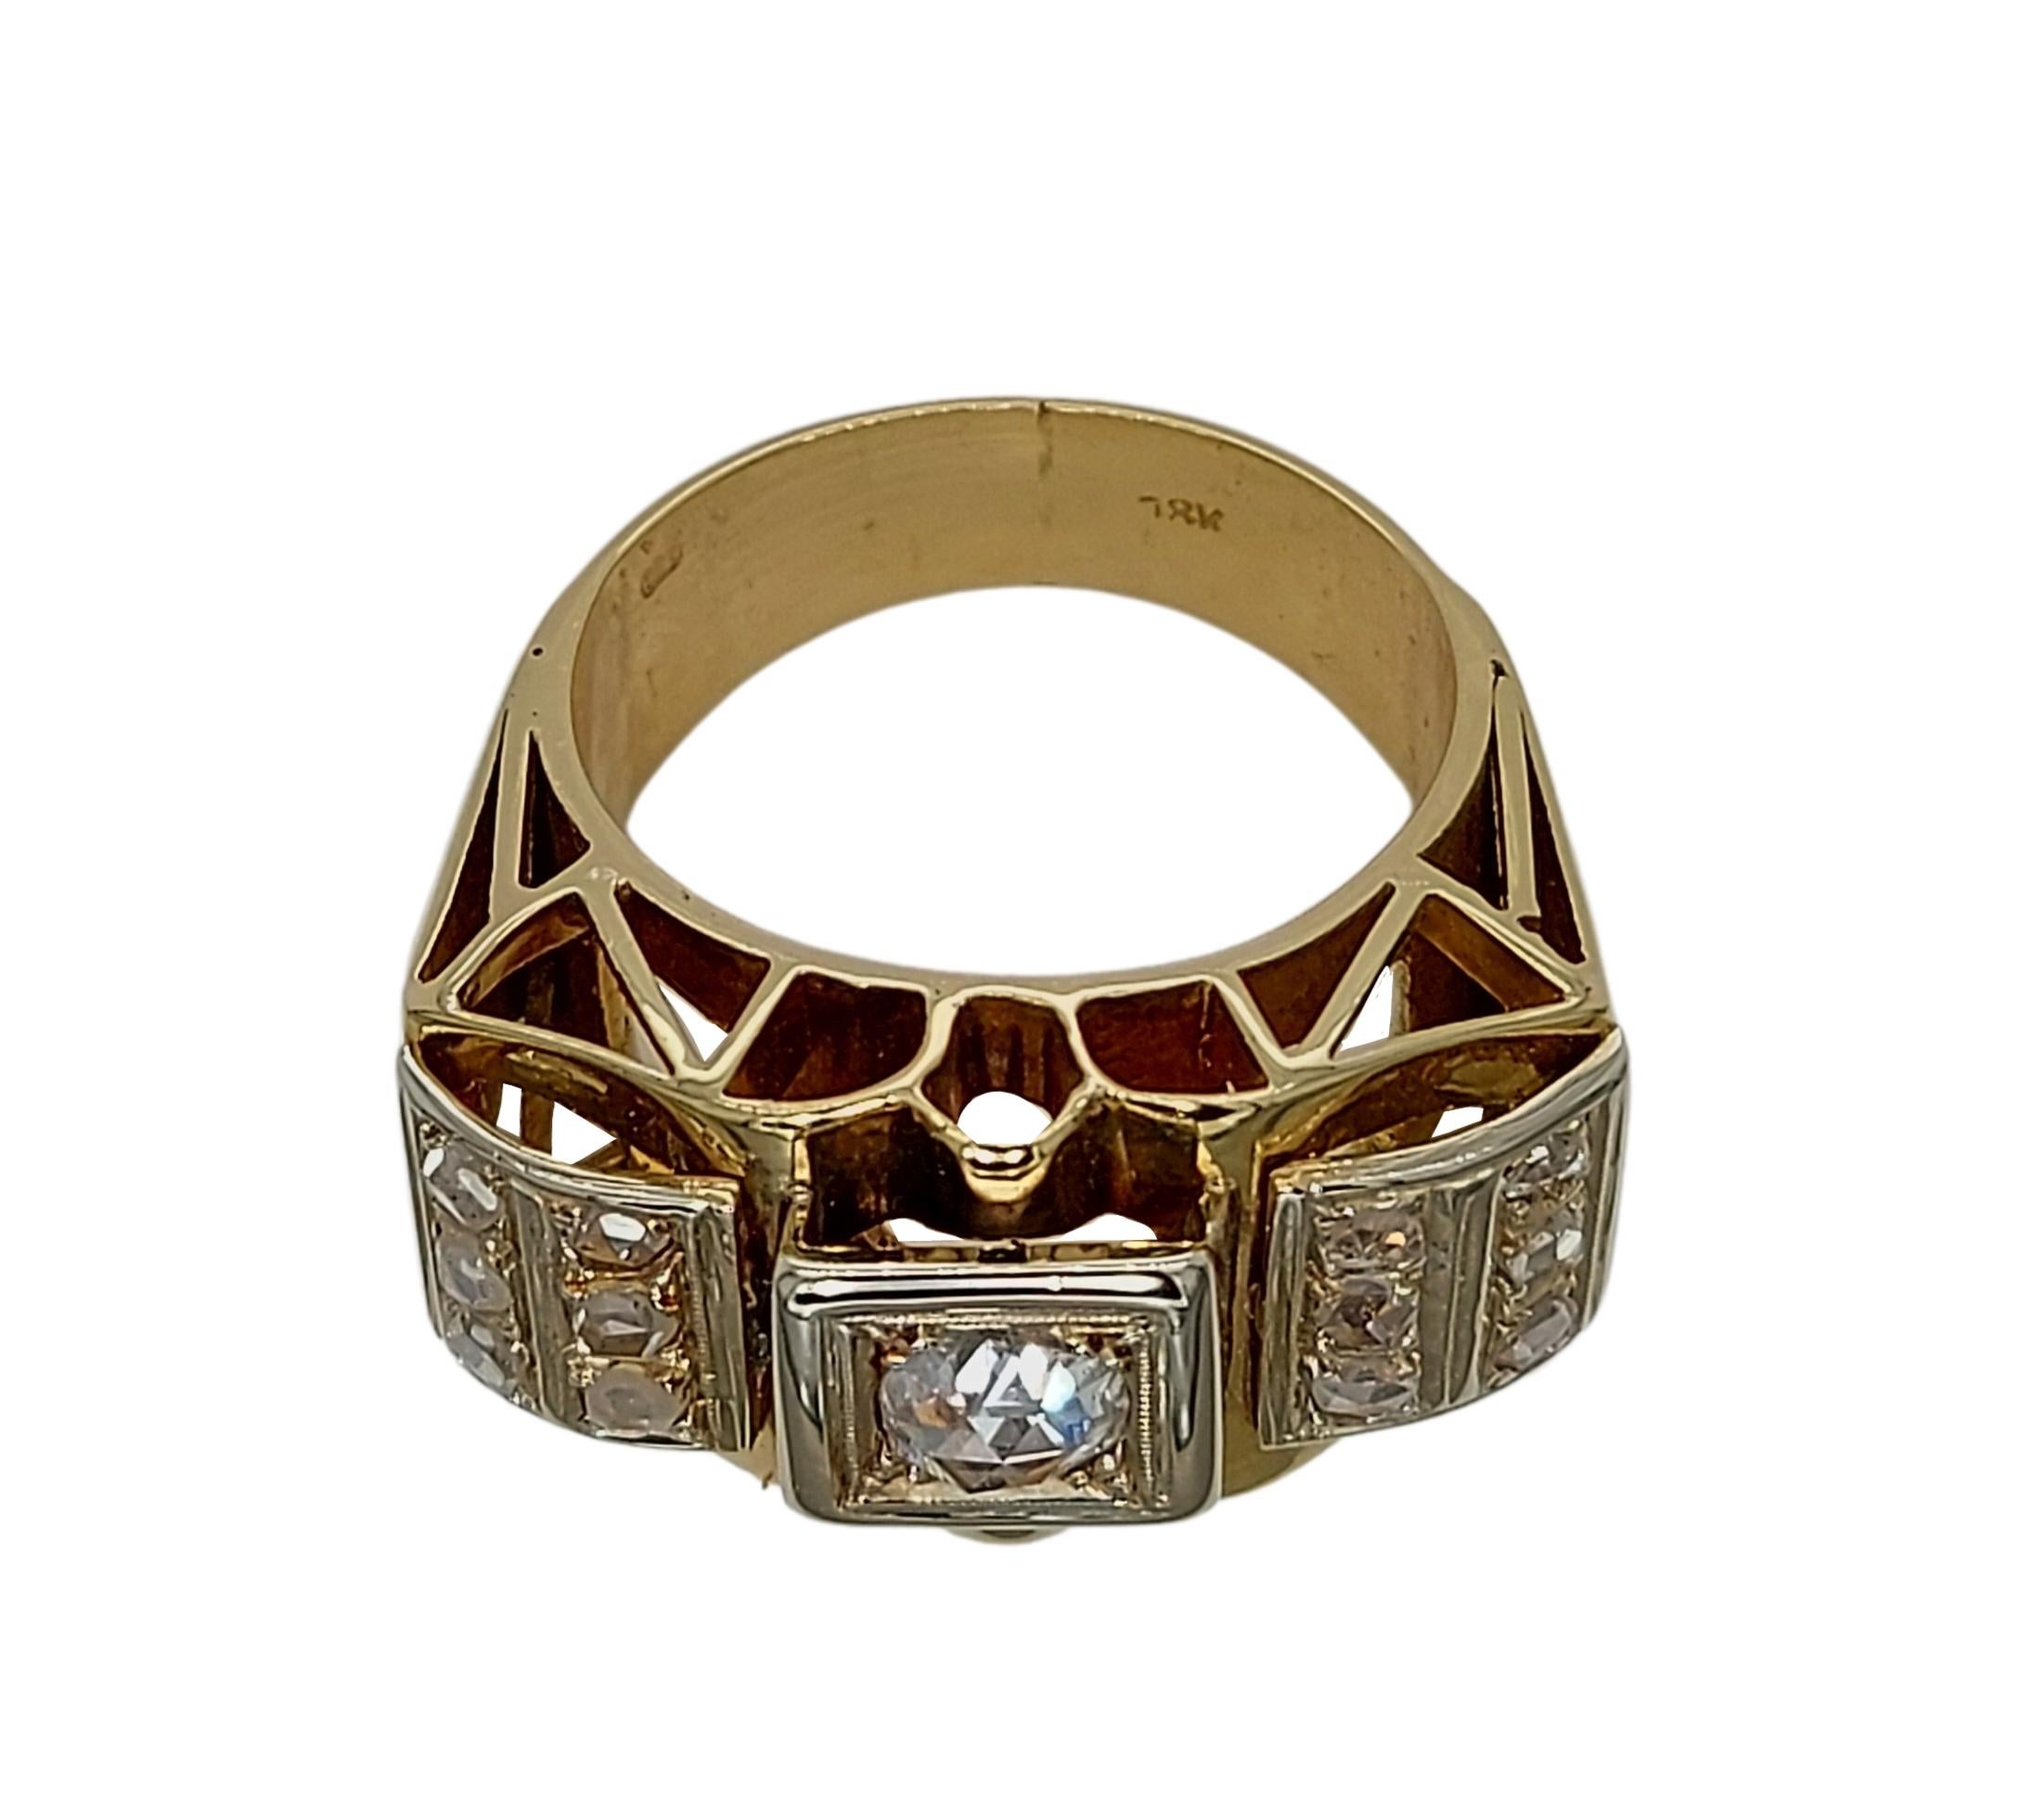 1940 s Vintage 18kt Yellow Gold Ring with 0.60ct Rose Cut Diamonds Set in Platinum

Diamonds: Centre diamond has a diameter of approx. 4.5 mm and is surrounded by 12 smaller diamonds F/G VS together 0.60 ct.

Material: 18kt Yellow Gold & Platinum on